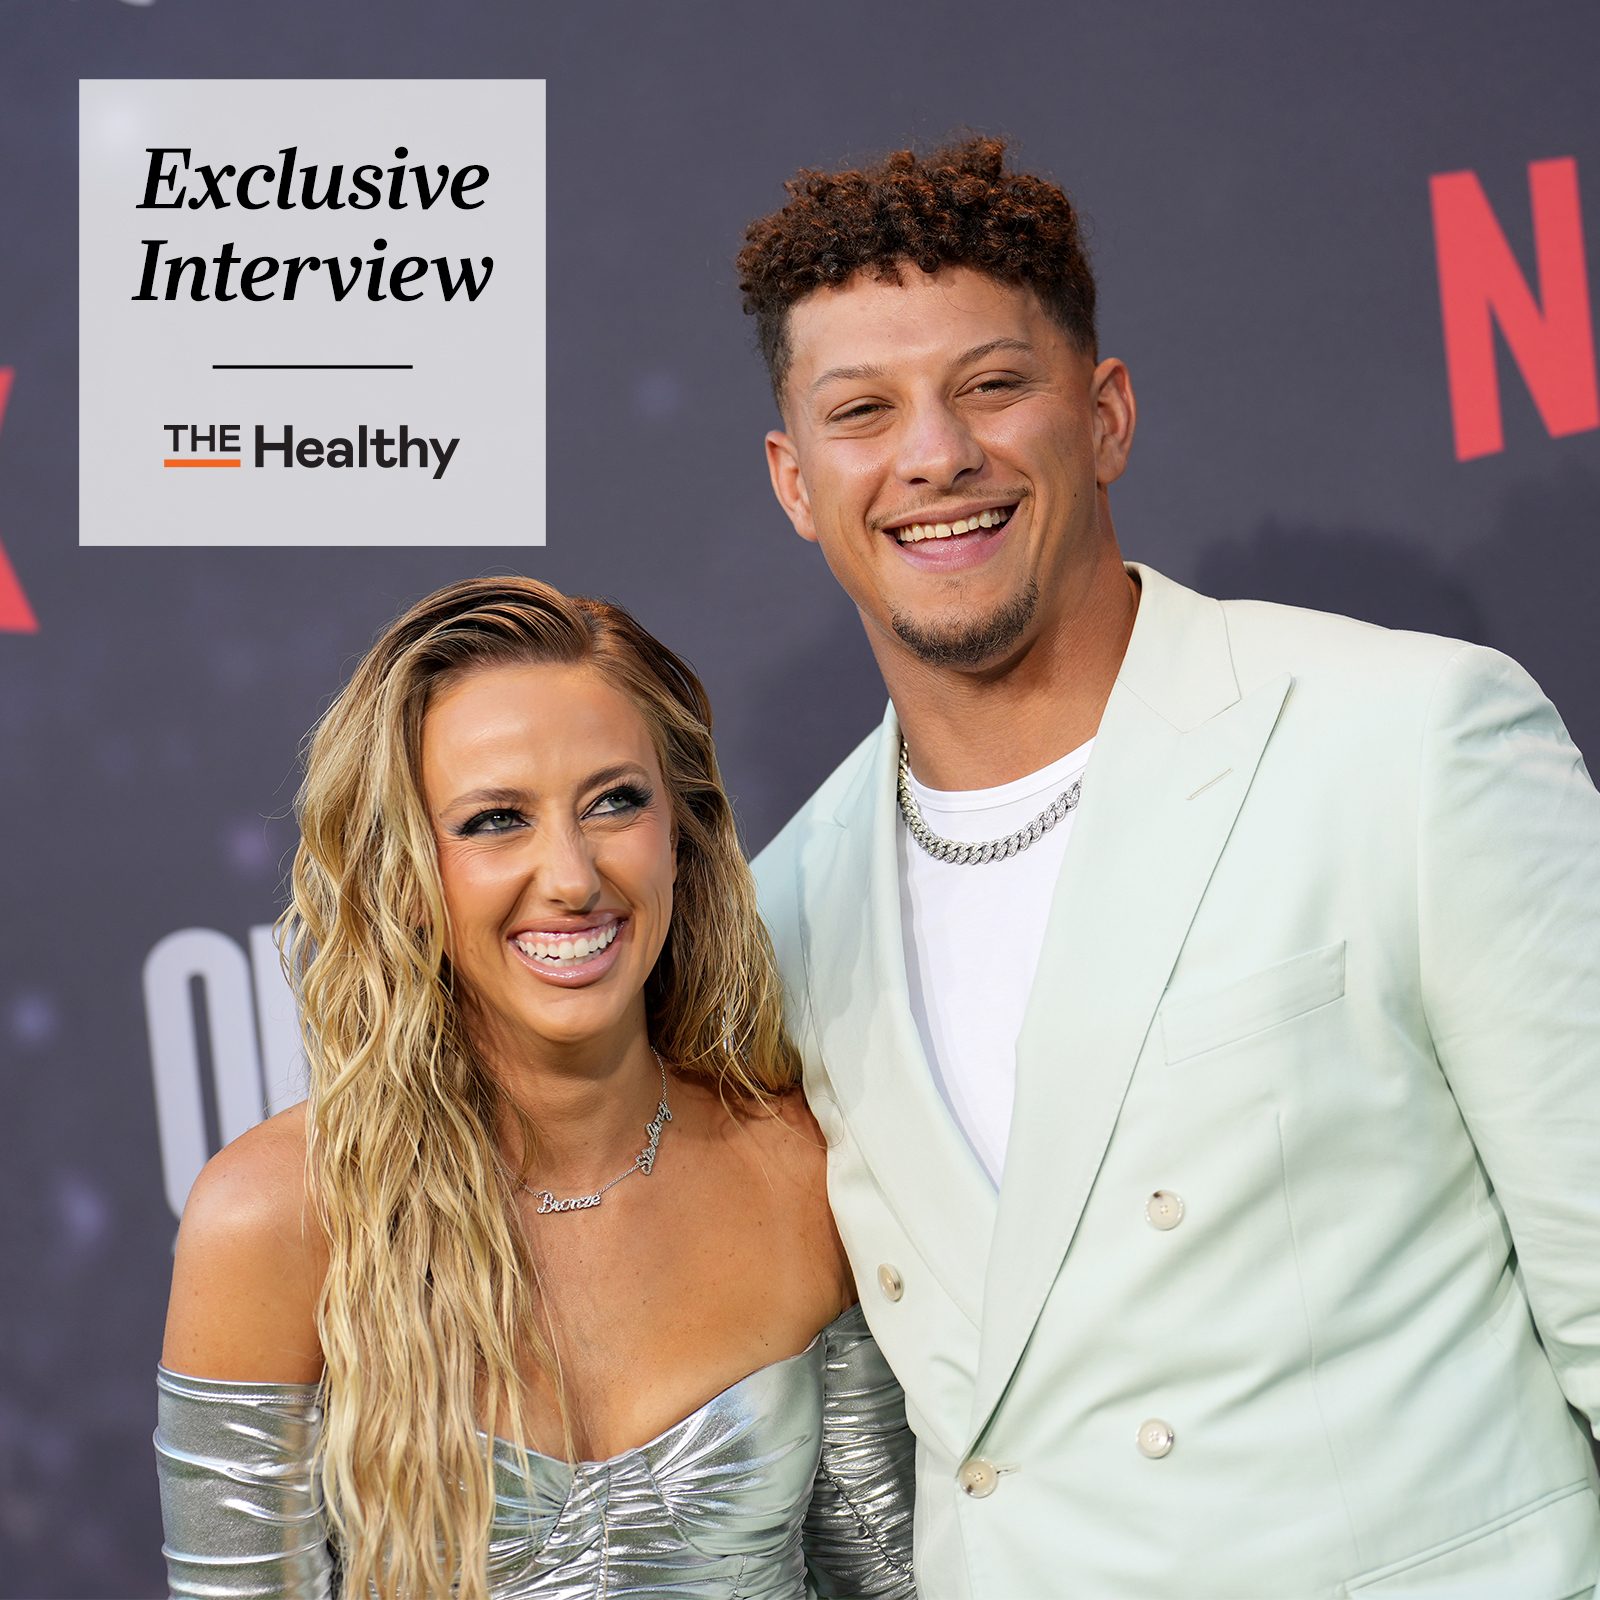 Brittany Mahomes on Family Life During NFL Playoffs: 'It's So Important To Take Care of Yourself'